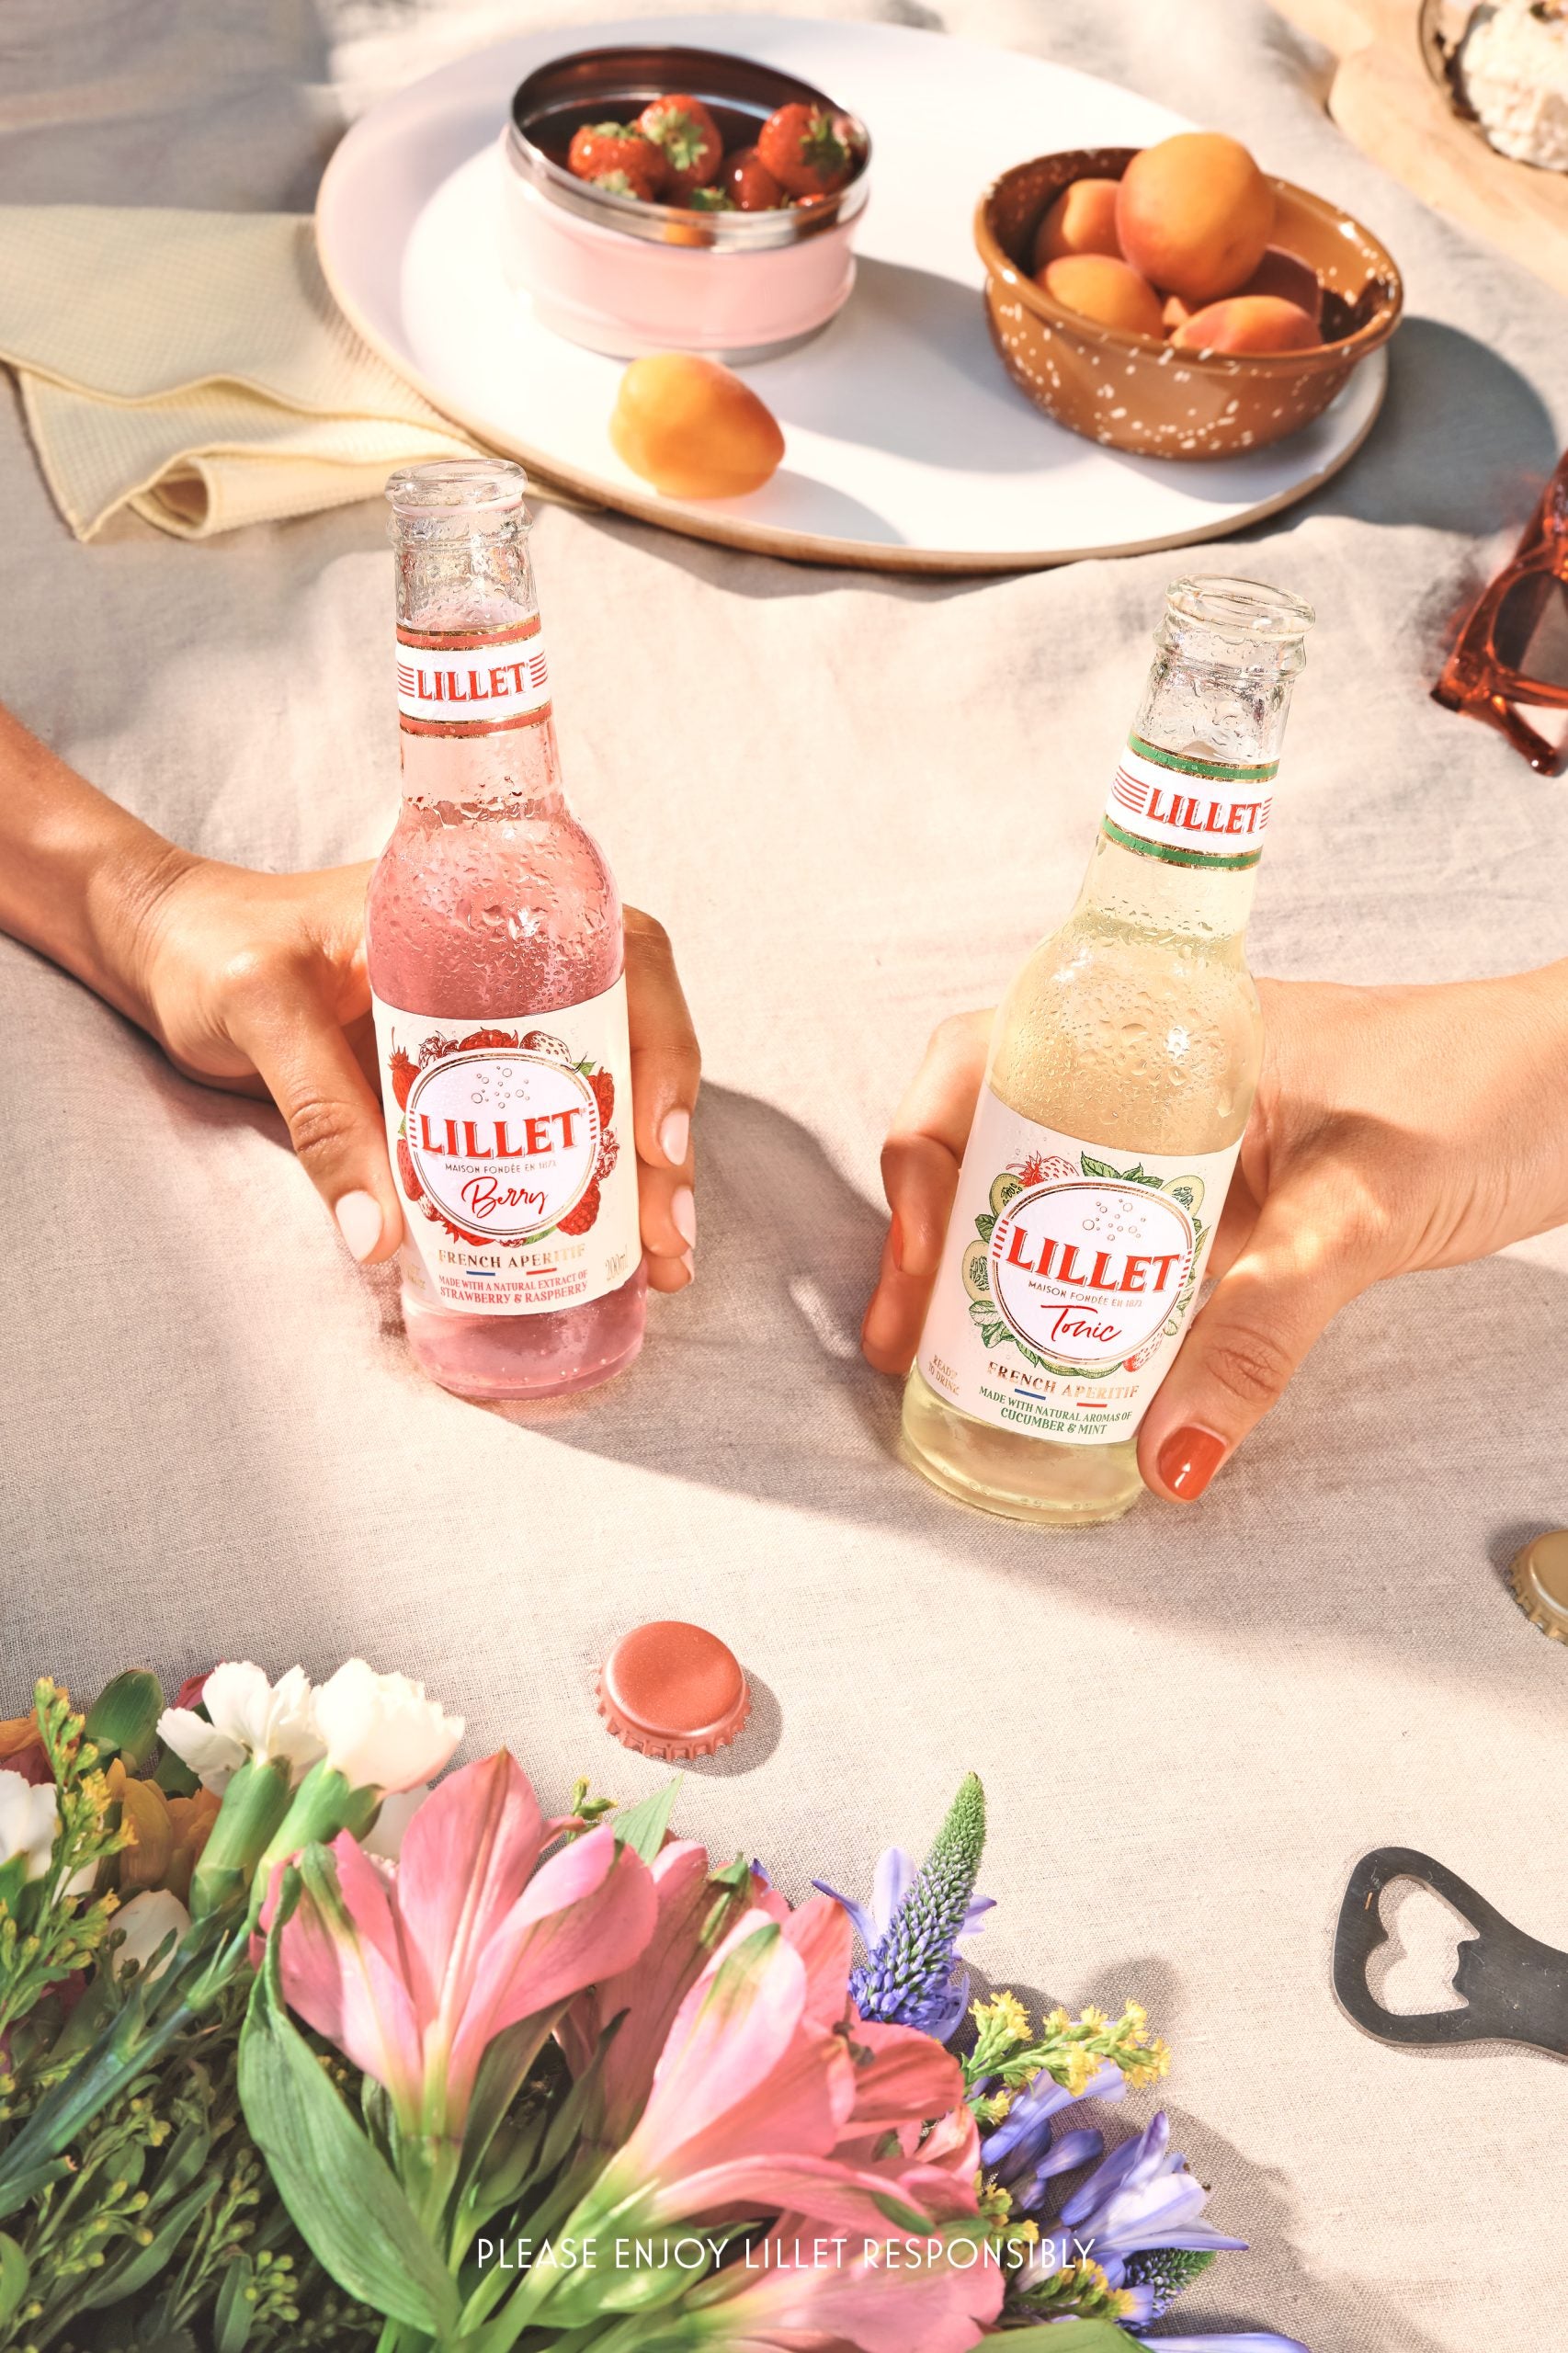 https://www.lillet.com/wp-content/uploads/RDM_2_3_LILLET-RTD-Lifestyle-Picnic-BERRY-TONIC-scaled.jpg